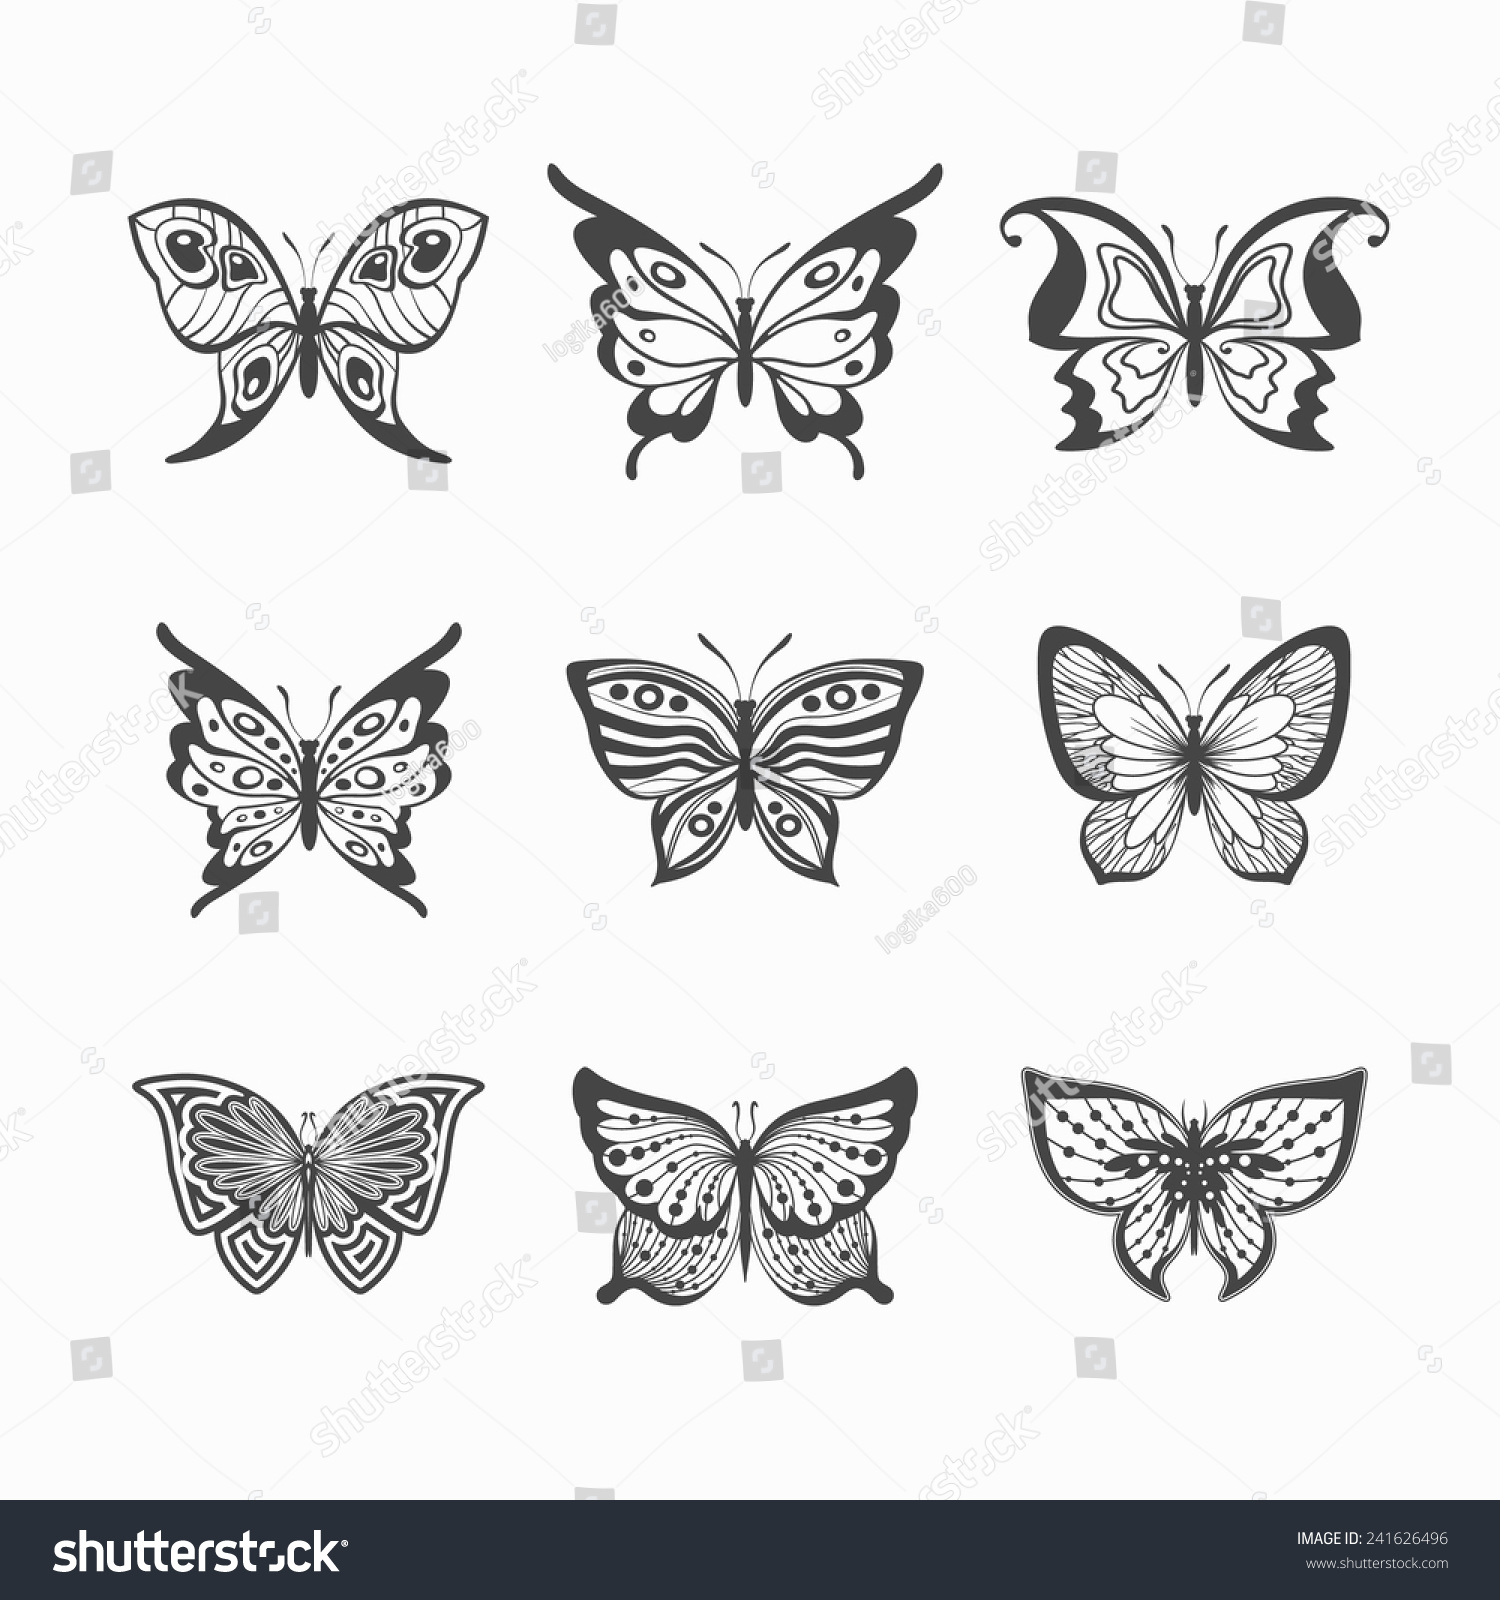 Collection Of Vector Stylized Butterflies. - 241626496 : Shutterstock